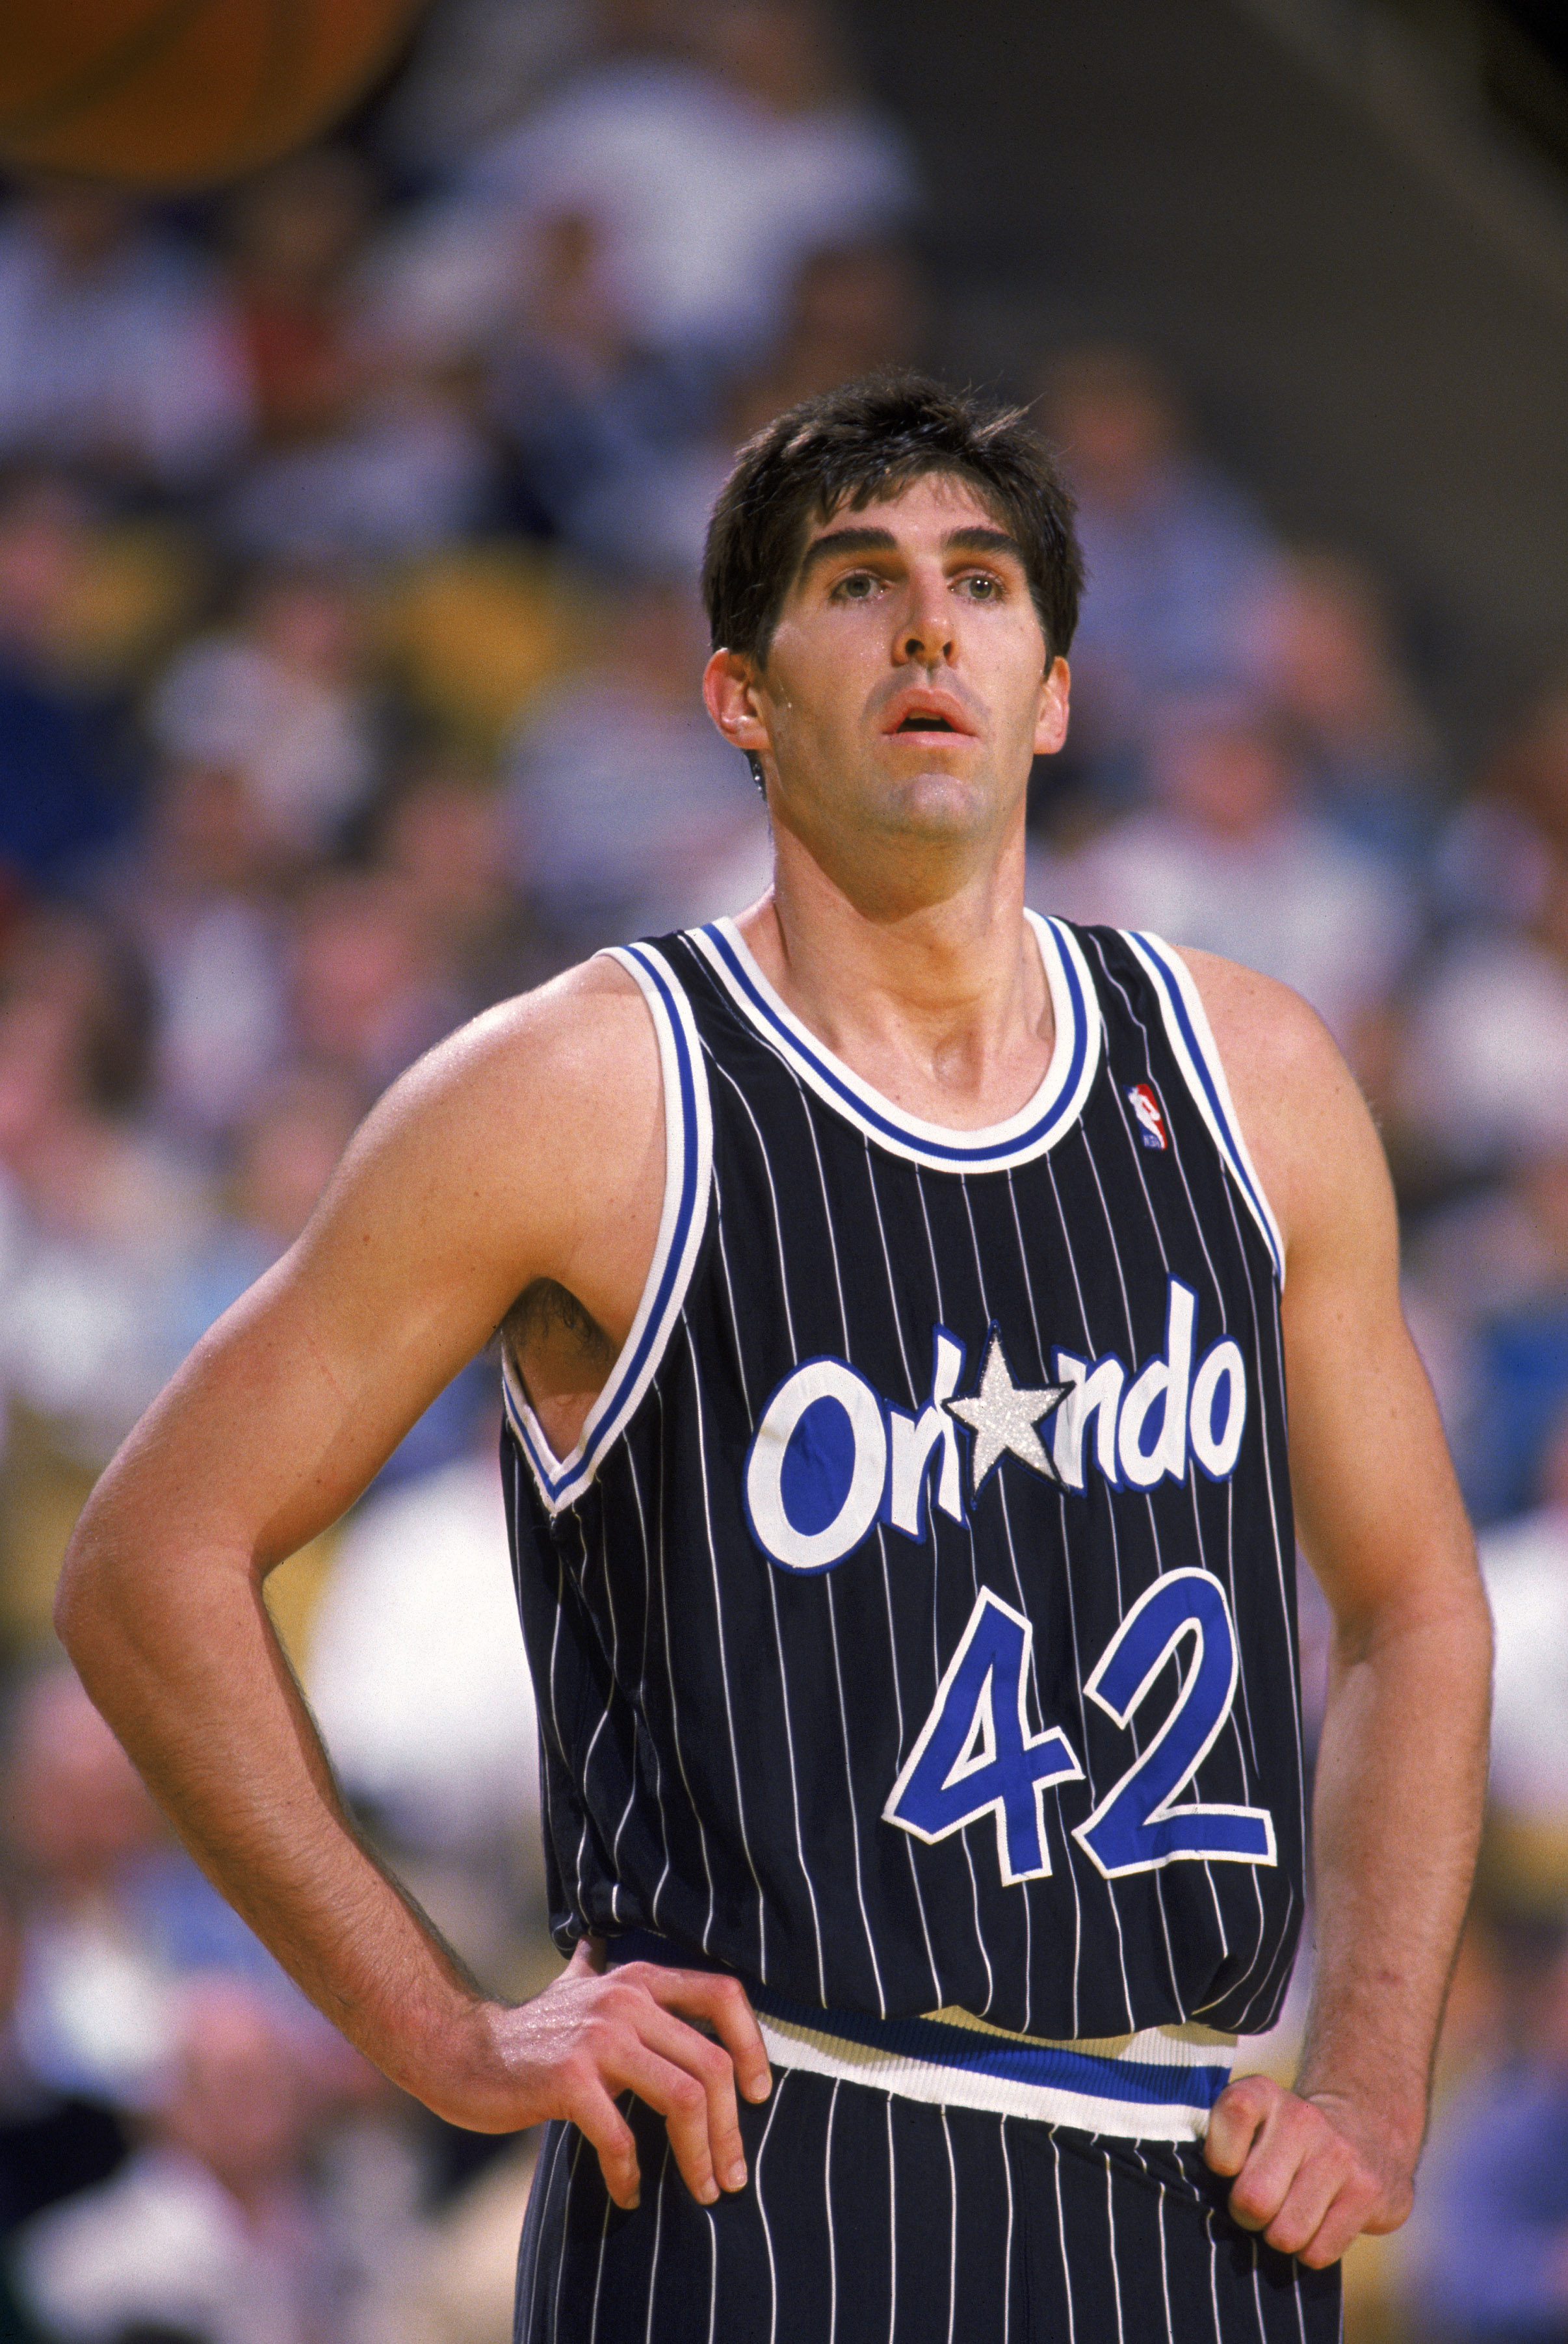 NBA: Power ranking the 30 best uniforms of all-time